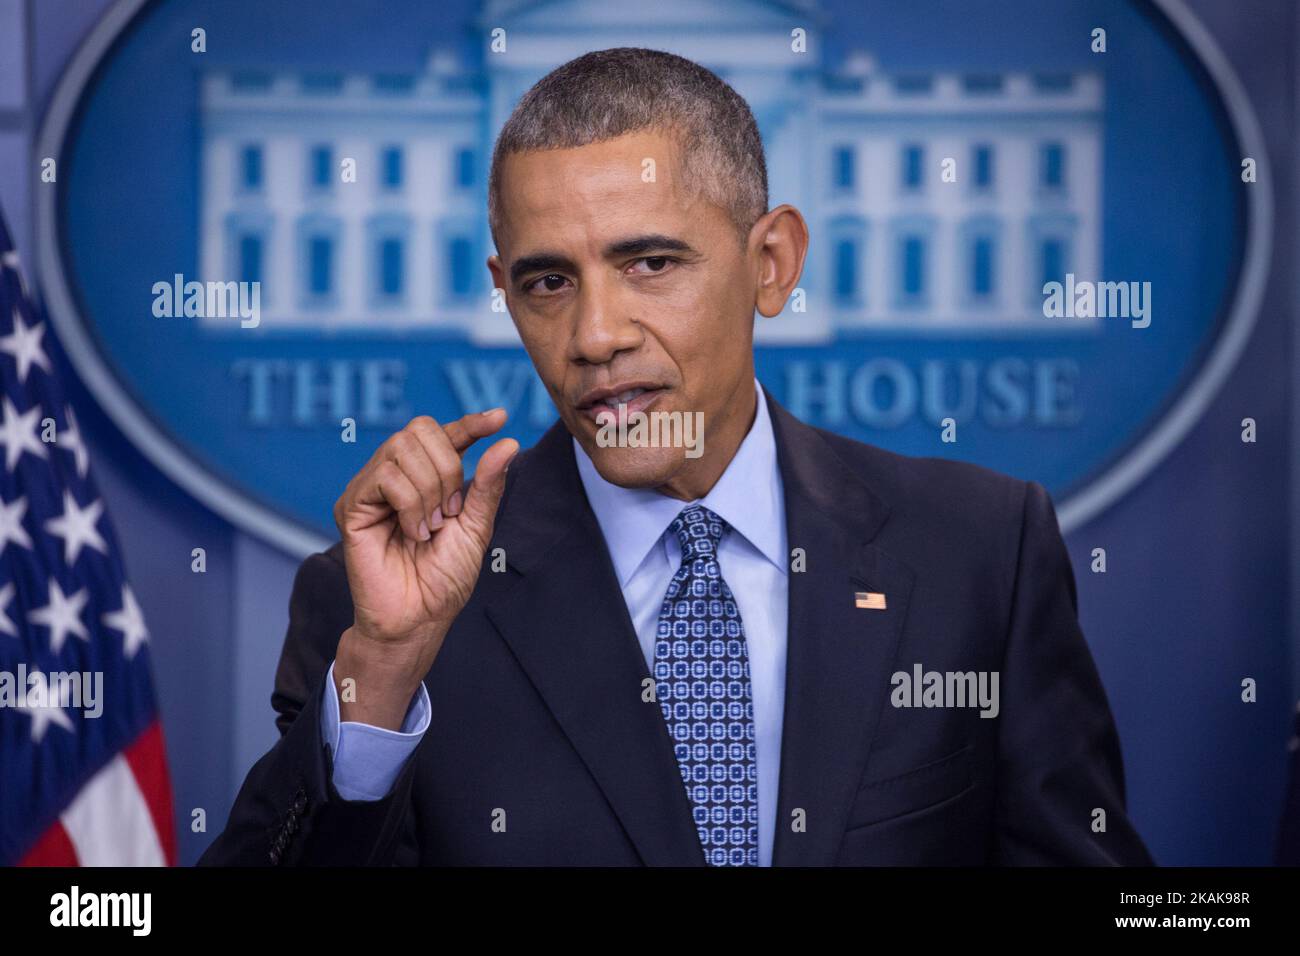 U.S. President Barack Obama holds the last news conference of his presidency in the Brady Press Briefing Room at the White House January 18, 2017 in Washington, DC. This was Obama's final question-and-answer session with reporters before New York real estate mogul and reality television personality Donald Trump is sworn in as the 45th president of the United States on Friday. (Photo by Cheriss May/NurPhoto) *** Please Use Credit from Credit Field *** Stock Photo